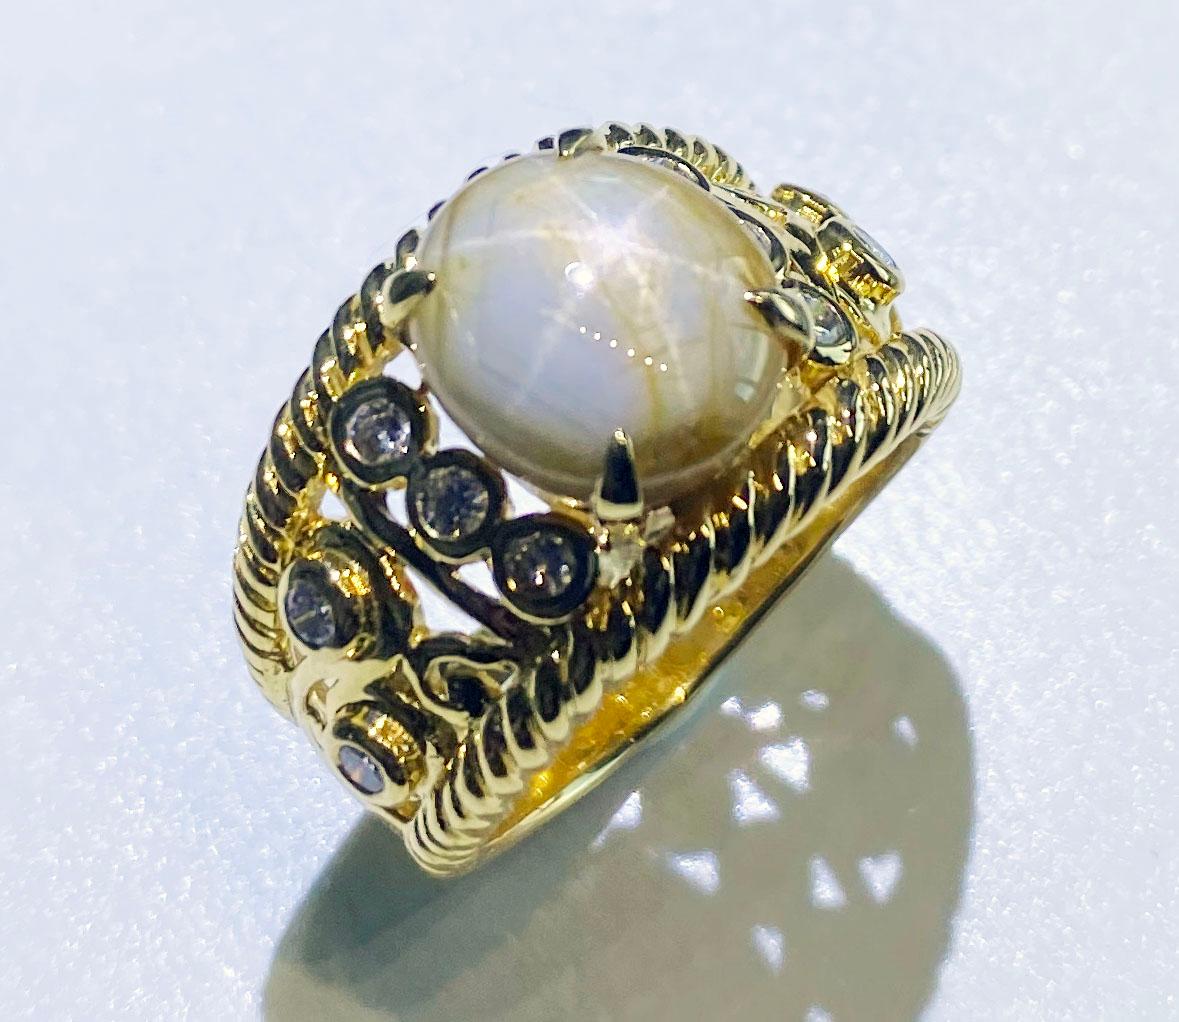 A Star Sapphire & Diamond Ring set in 18kt Yellow Gold set with a Milk & Honey Star Sapphire surrounded by Diamonds. This Star Sapphire is a hefty 12.41 Carats originating from Sri Lanka. The Ring  size is a USA 11. The Sapphire is accented by 10